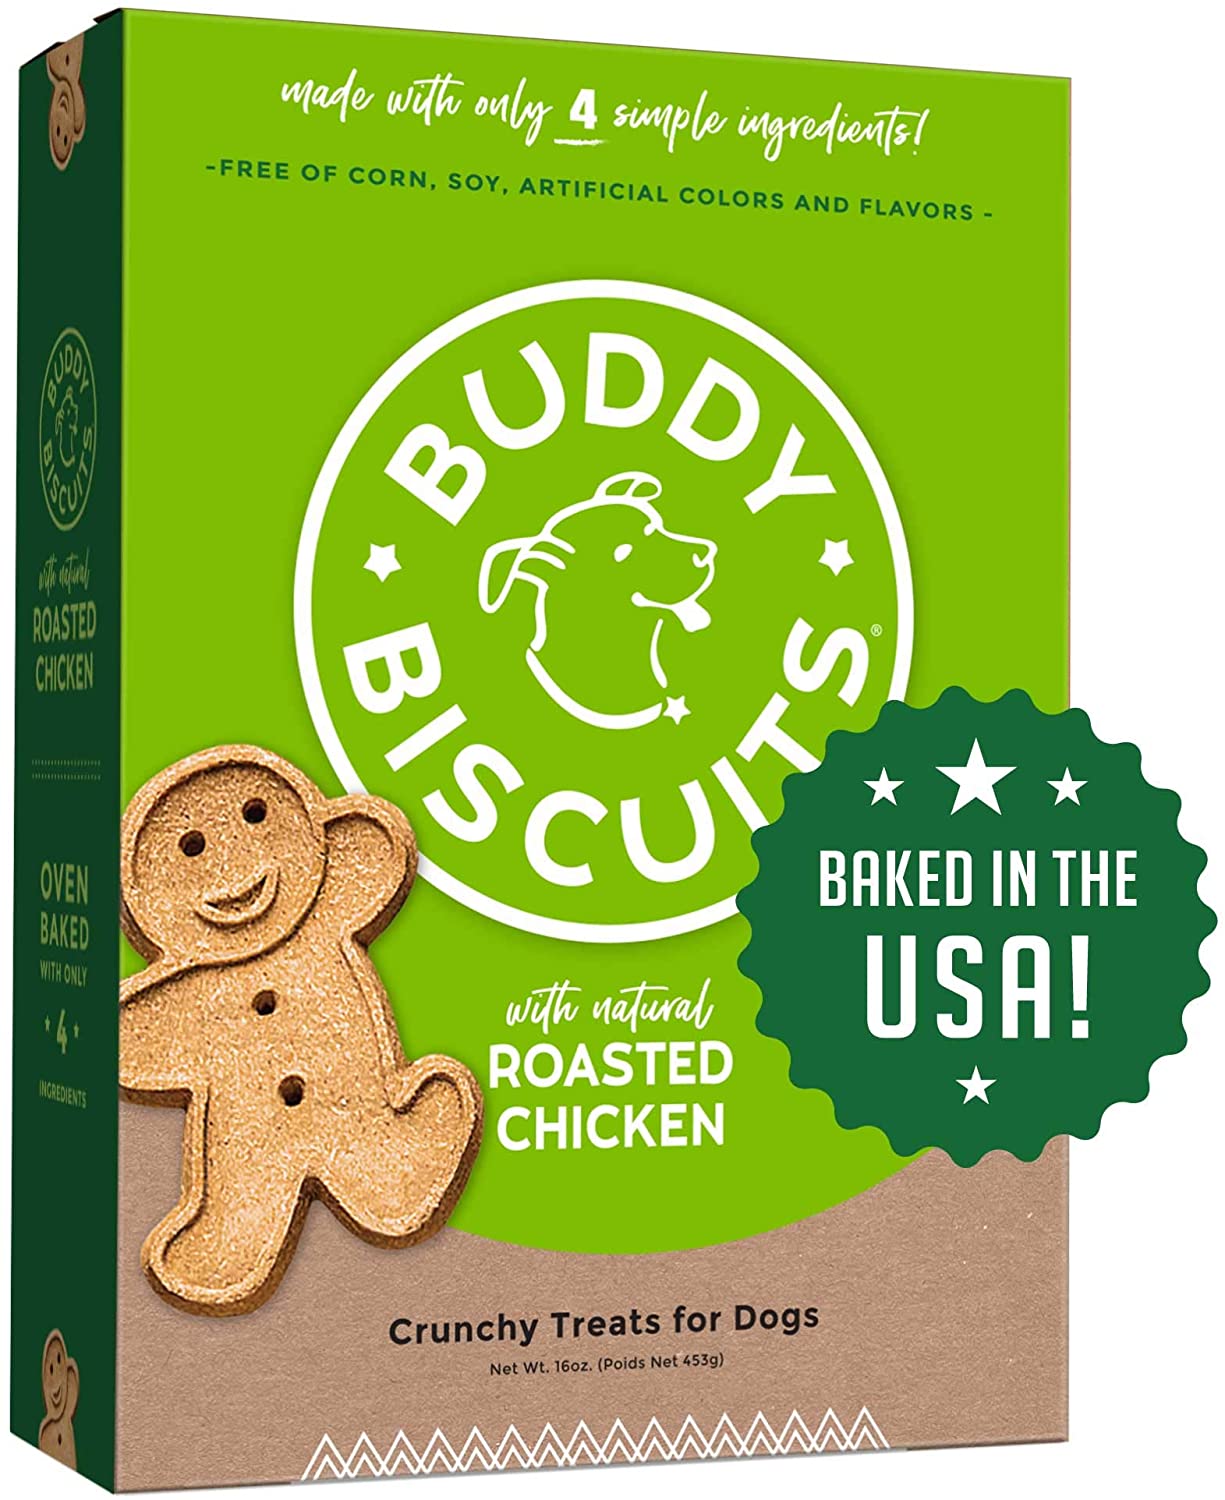 Buddy Biscuits Crunchy Treats With Roasted Chicken - 16 Oz